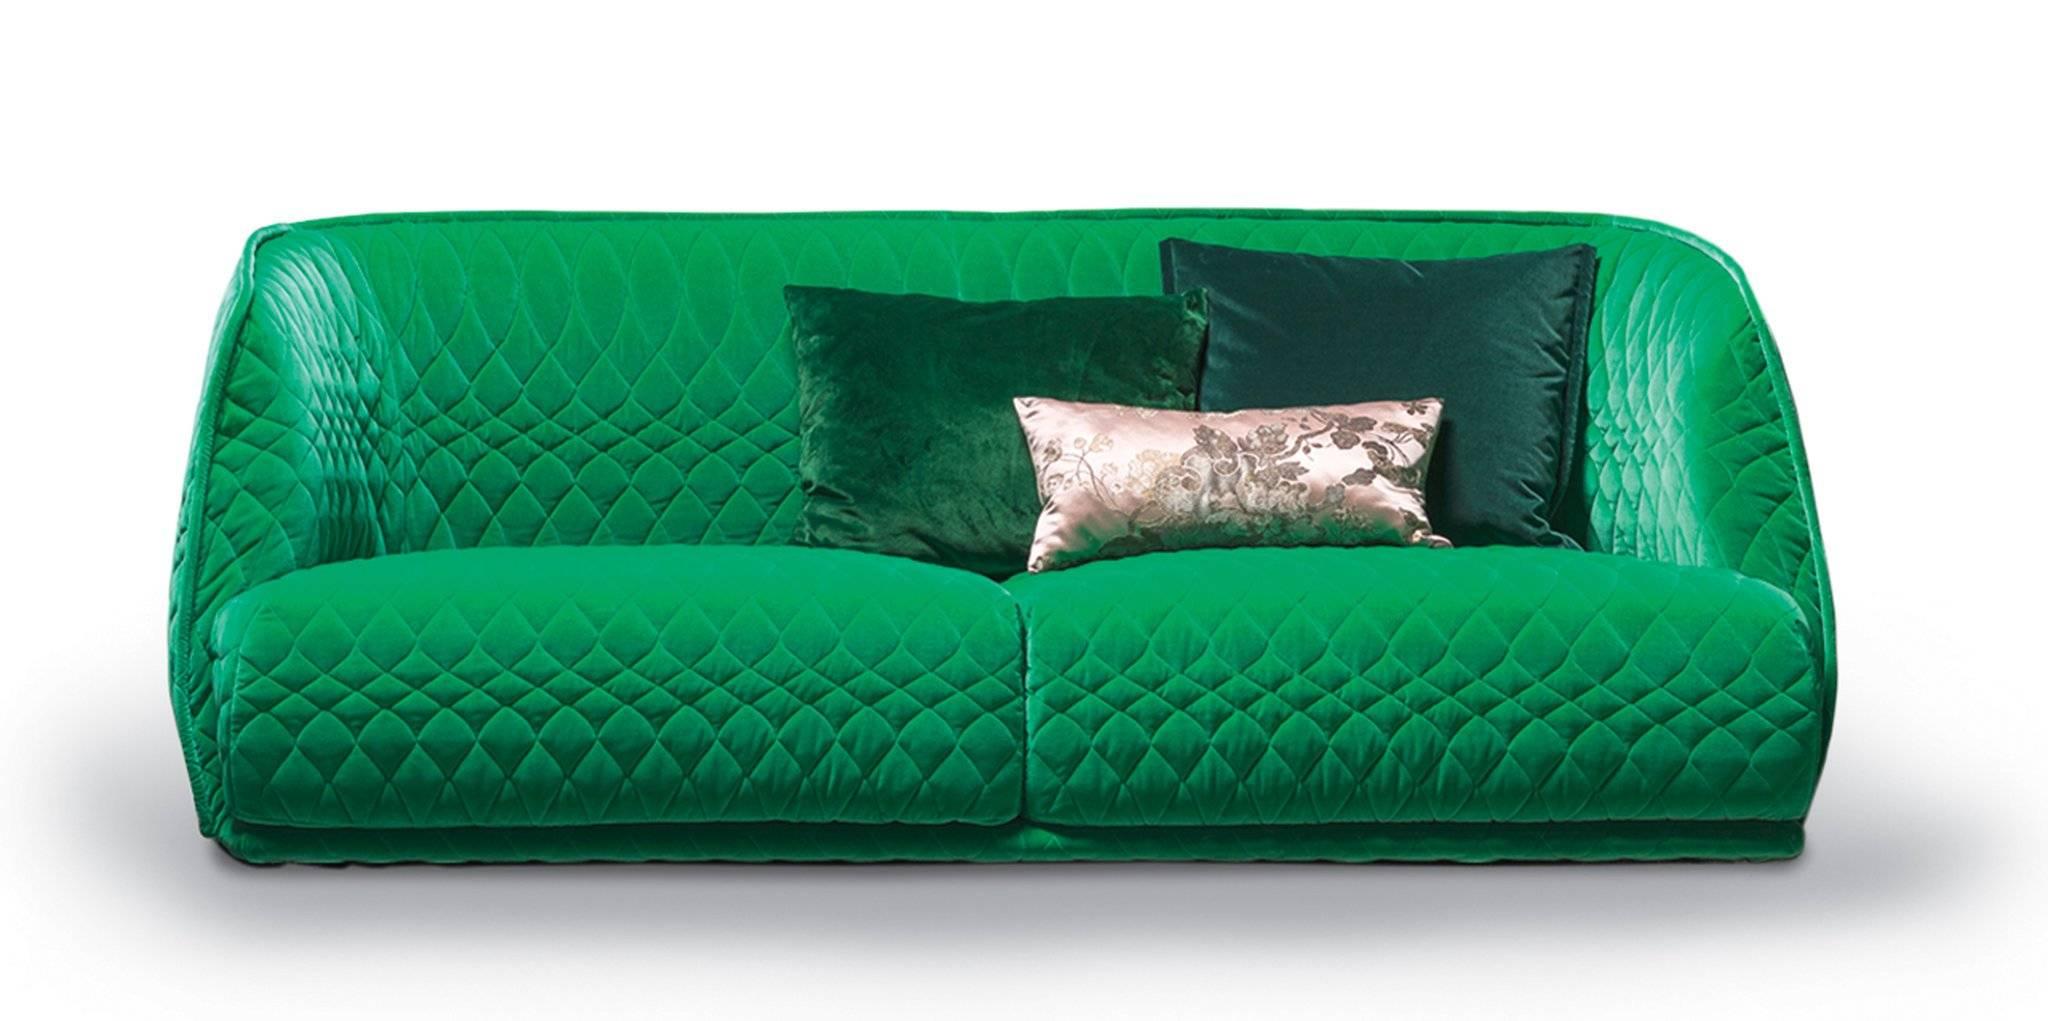 Quilted Moroso Redondo Two-Seat Sofa in Tufted Upholstery by Patricia Urquiola For Sale